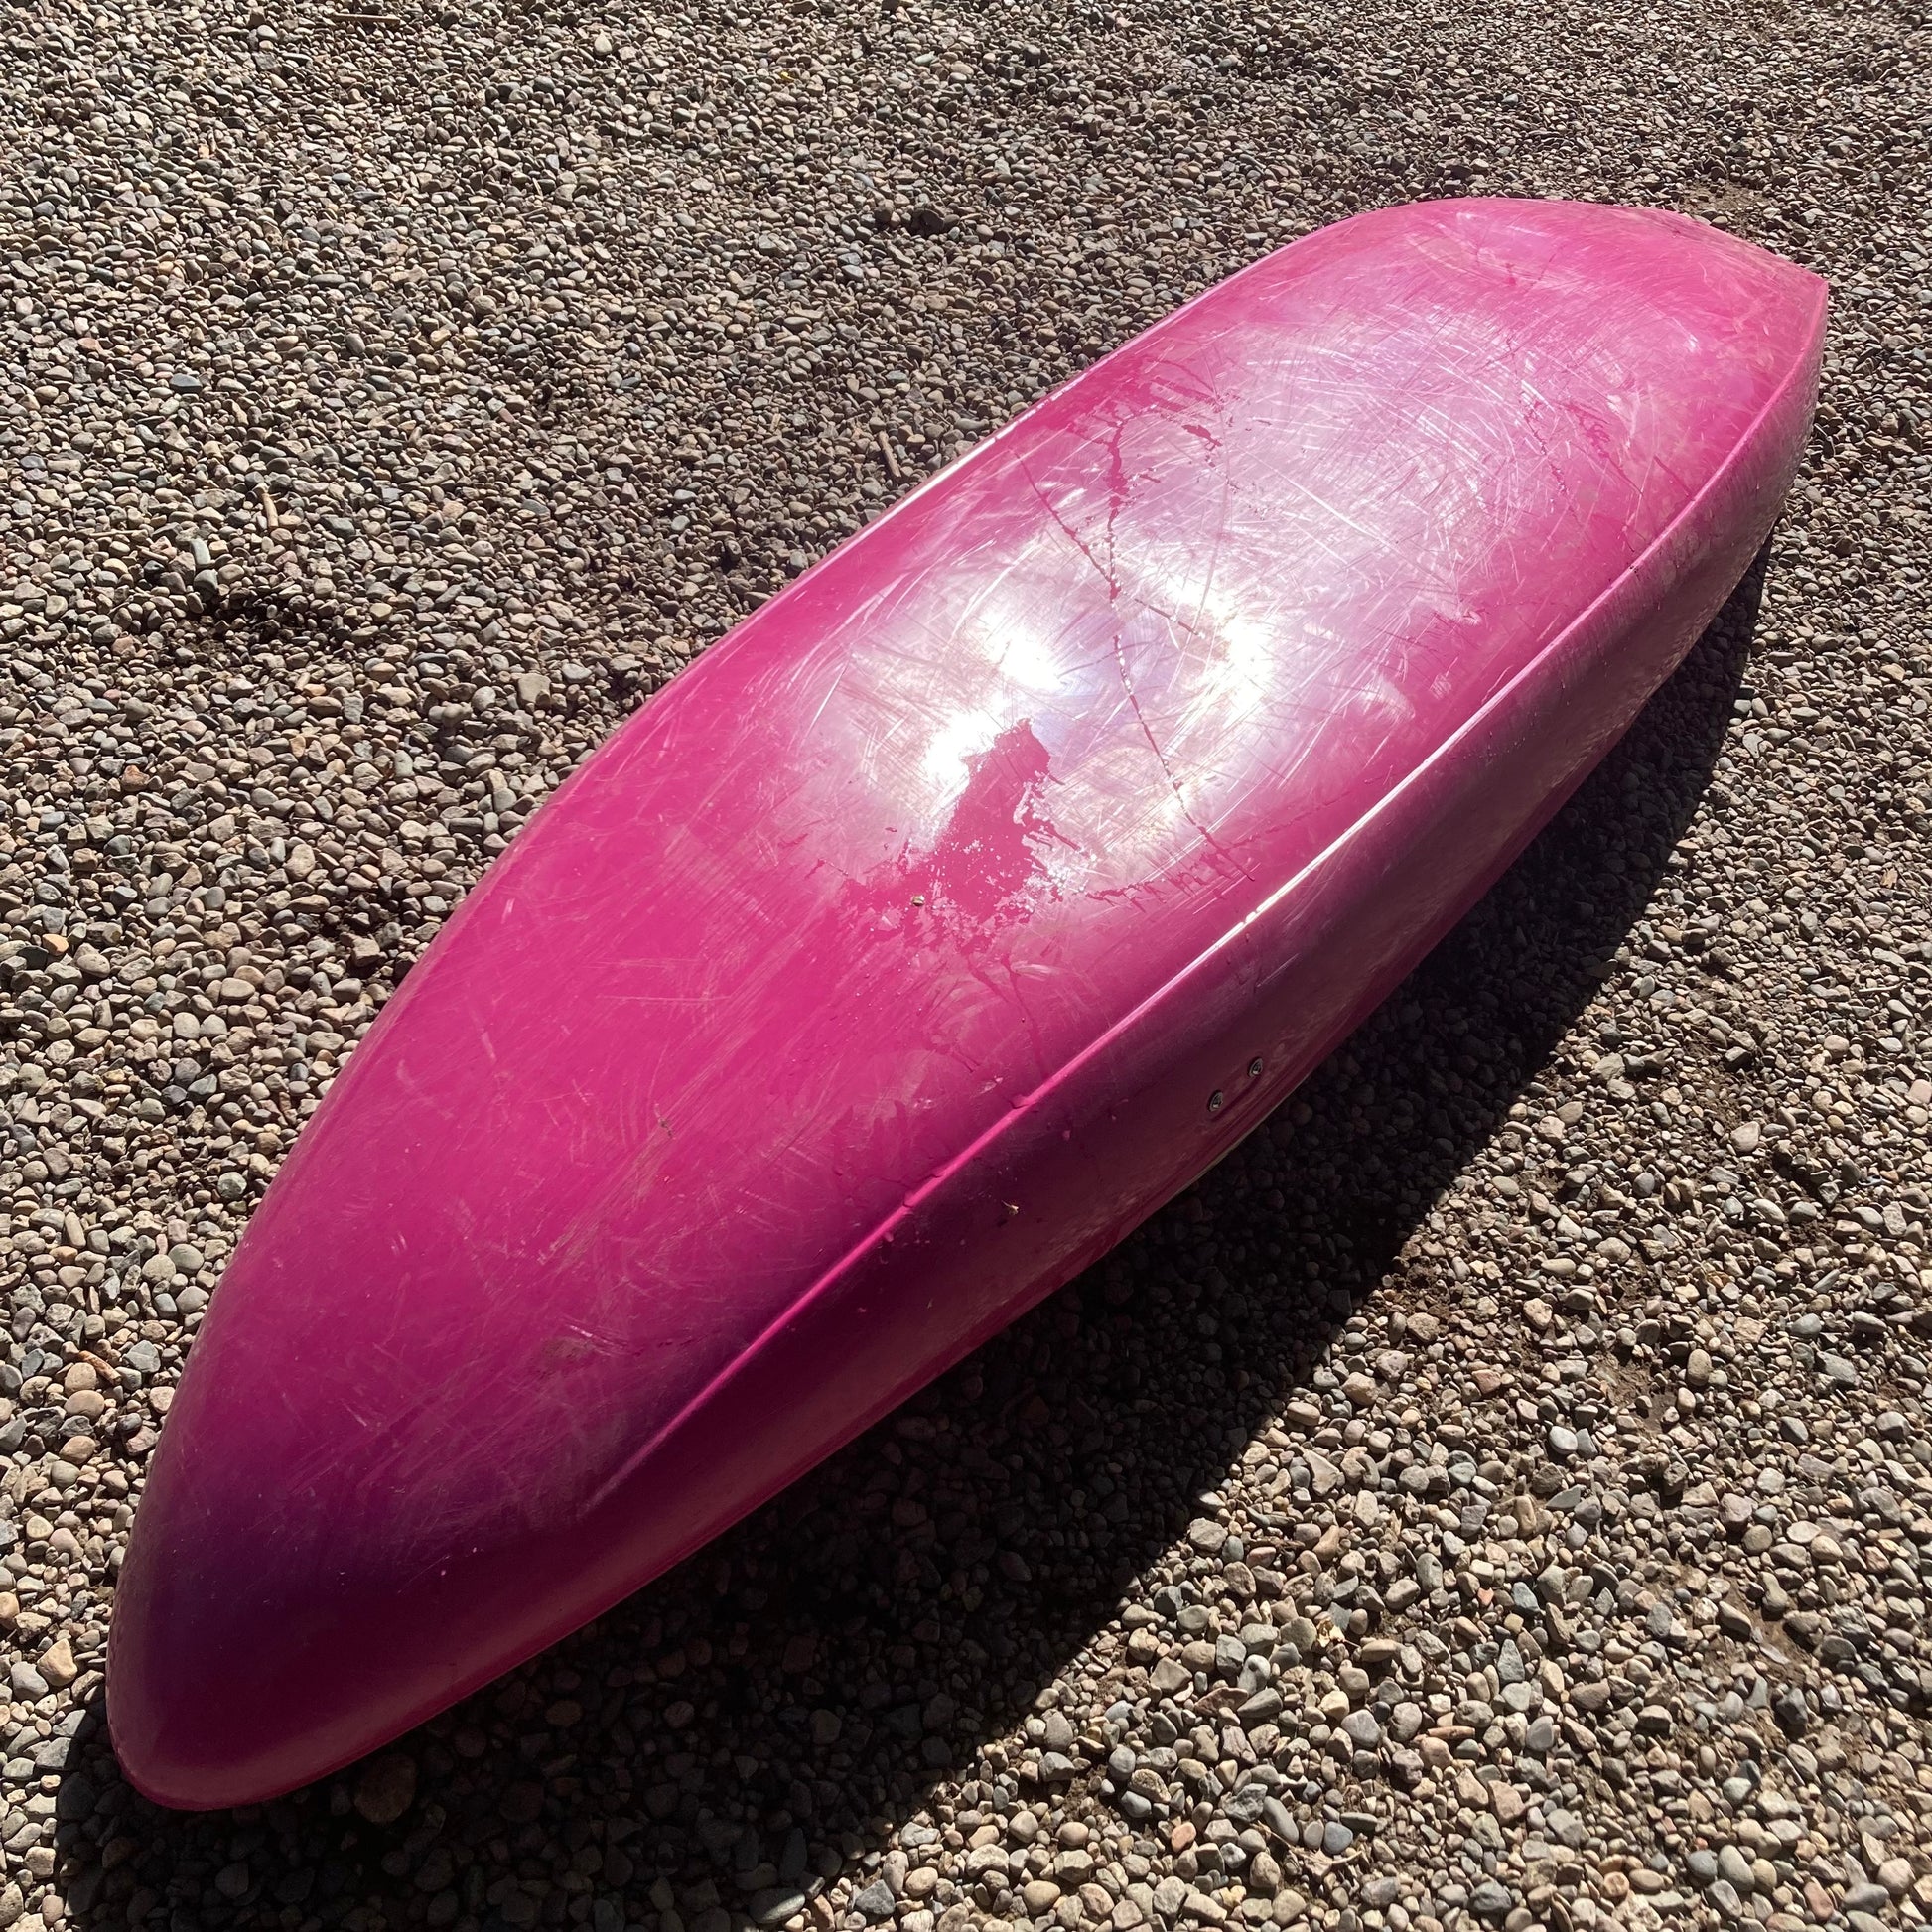 A Verus Demo Flux S/M pink canoe laying on the ground.